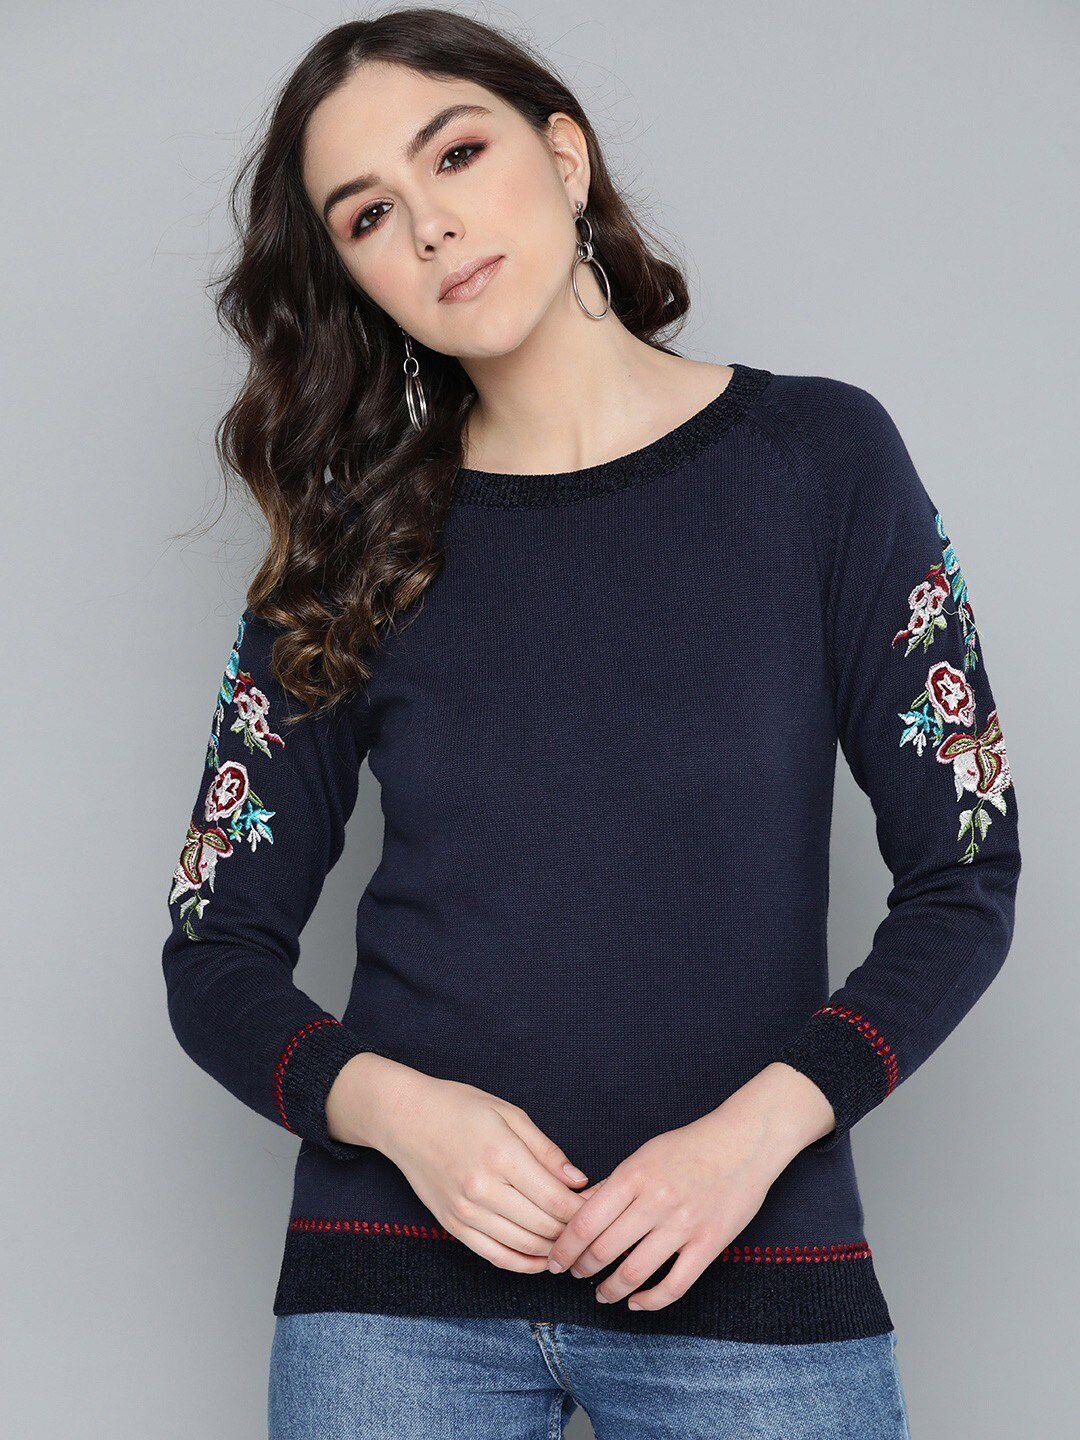 carlton london women navy blue & red floral pullover with embroidered detail